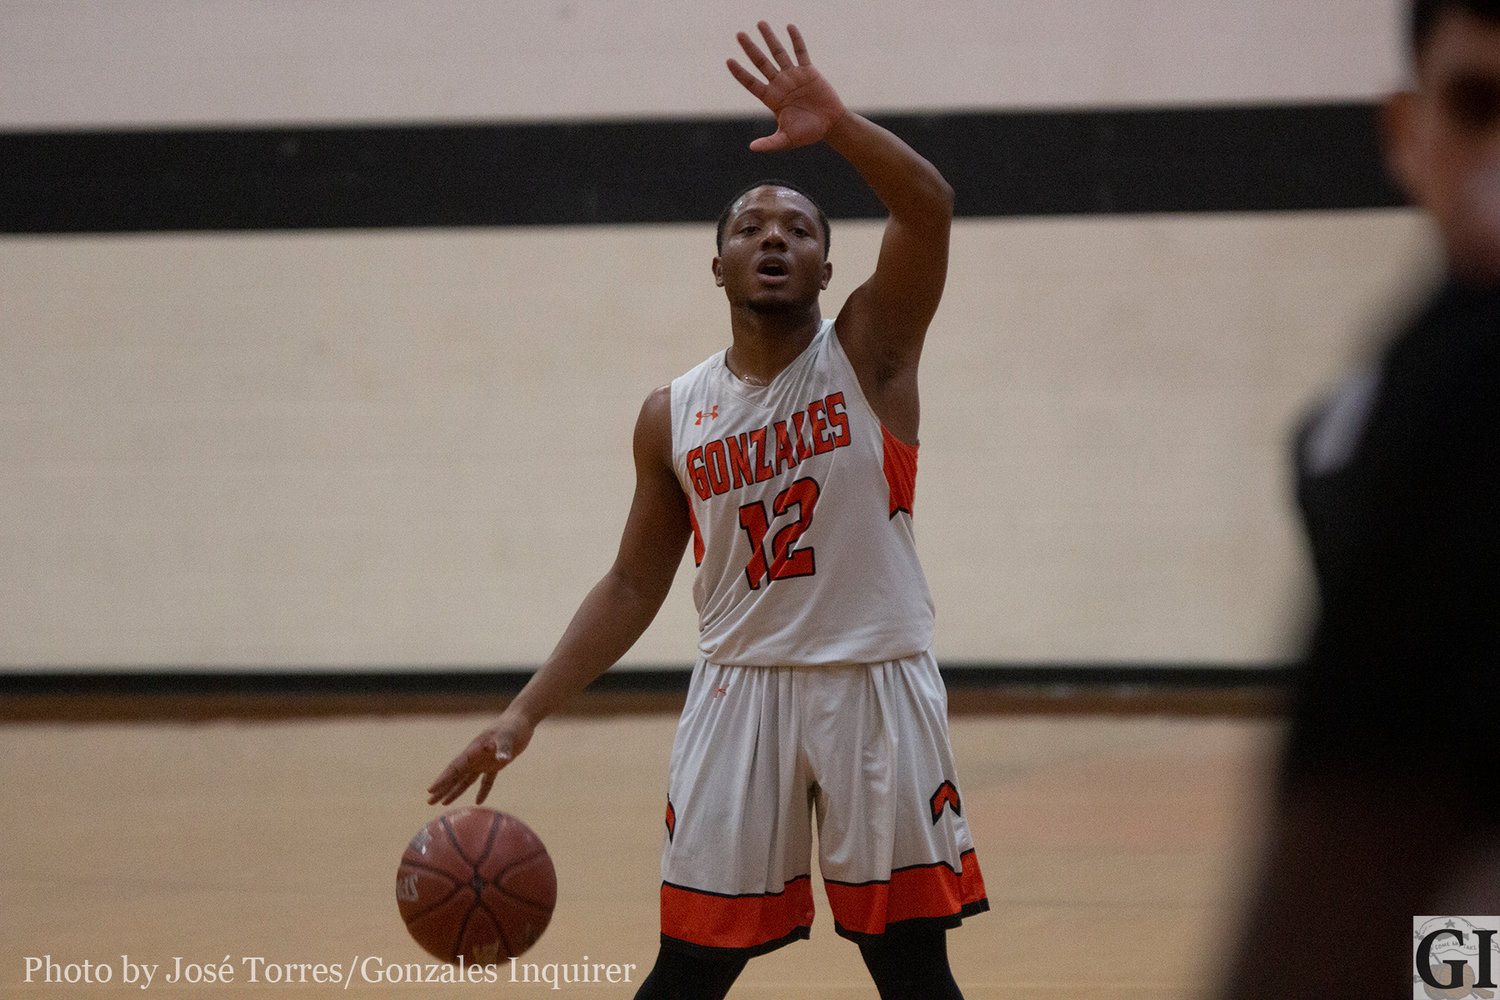 Senior Apache player Contrell Smith (12) was effective Tuesday night, leading the team in scoring with 17 points as he went 8-of-13 from the field in Gonzales’ 60-54 loss.